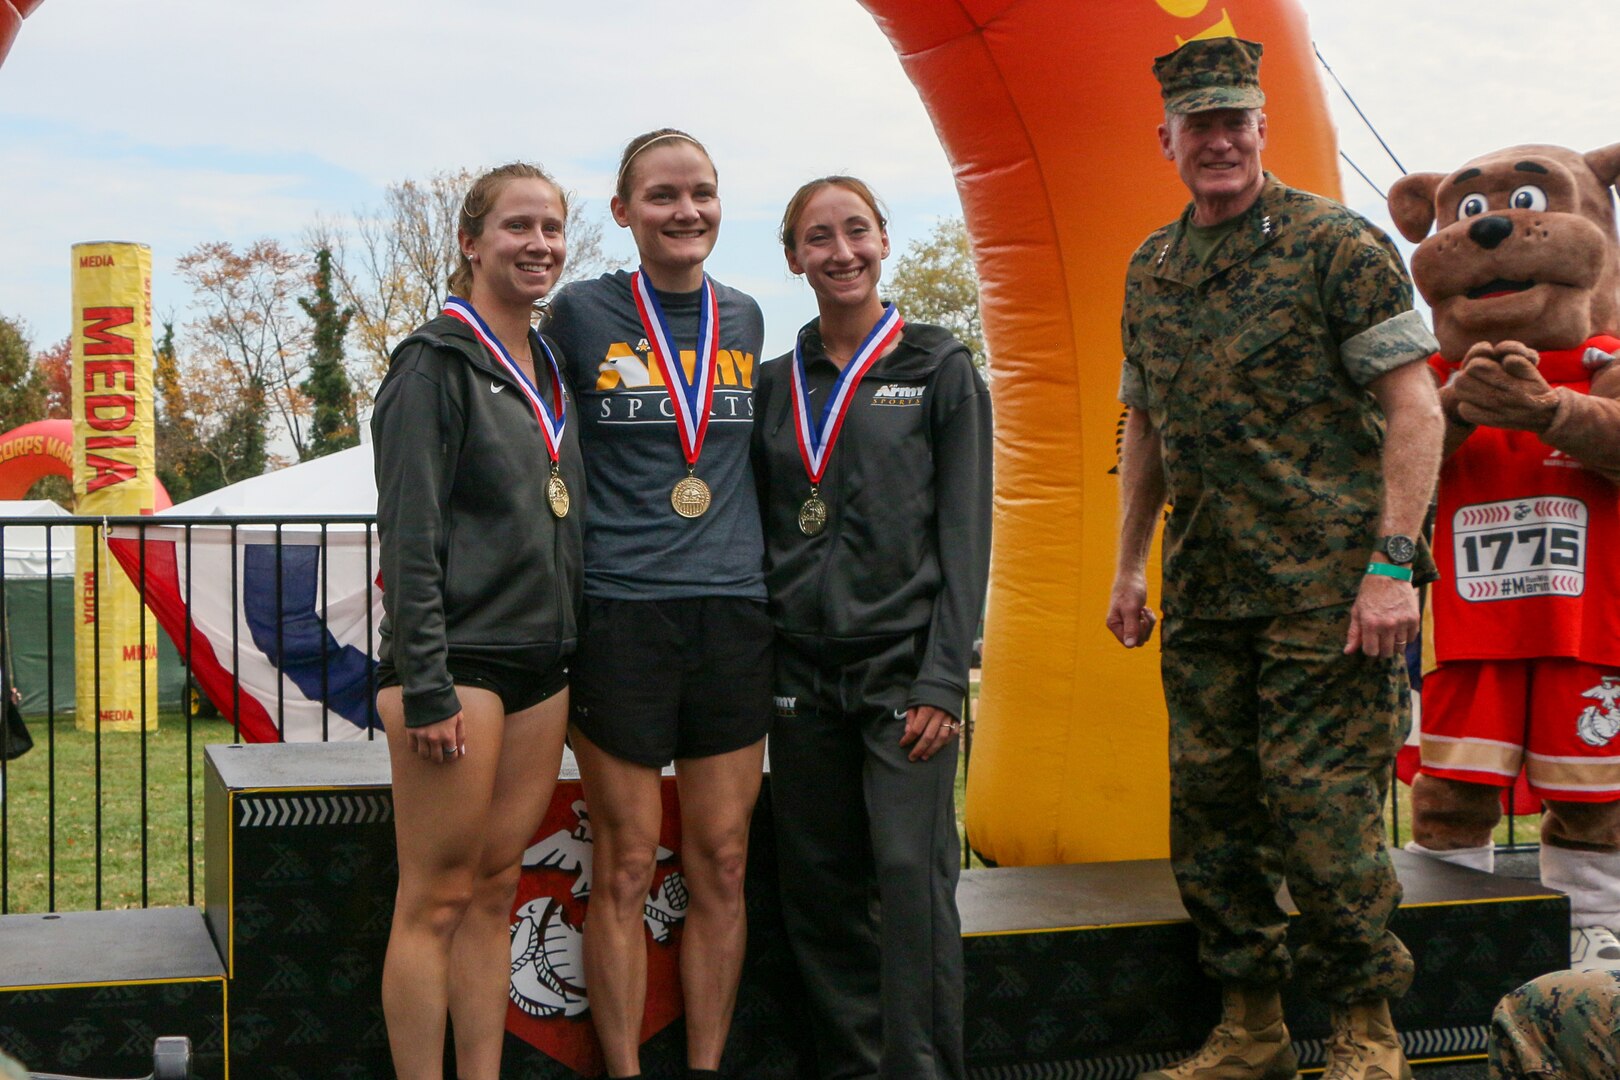 Army Women capture gold in the women's team competition of the 2023 Armed Forces Marathon Championship held in conjunction with the 48th Marine Corps Marathon in Washington, D.C.  The Armed Forces Championship features teams from the Army, Marine Corps, Navy (with Coast Guard runners), and Air Force (with Space Force Runners).  From left to right:  2nd Lt. Haley Seaward of Fort Leonard Wood, Mo.; 1st Lt. Krsten Gray of Fort Meade, Md. and 1st Lt. Samantha Collett of Fort Bliss, Texas, with Lt Gen Edward Banta (Deputy Commandant for Installations and Logistics).  Department of Defense Photo by Mr. Steven Dinote - Released.